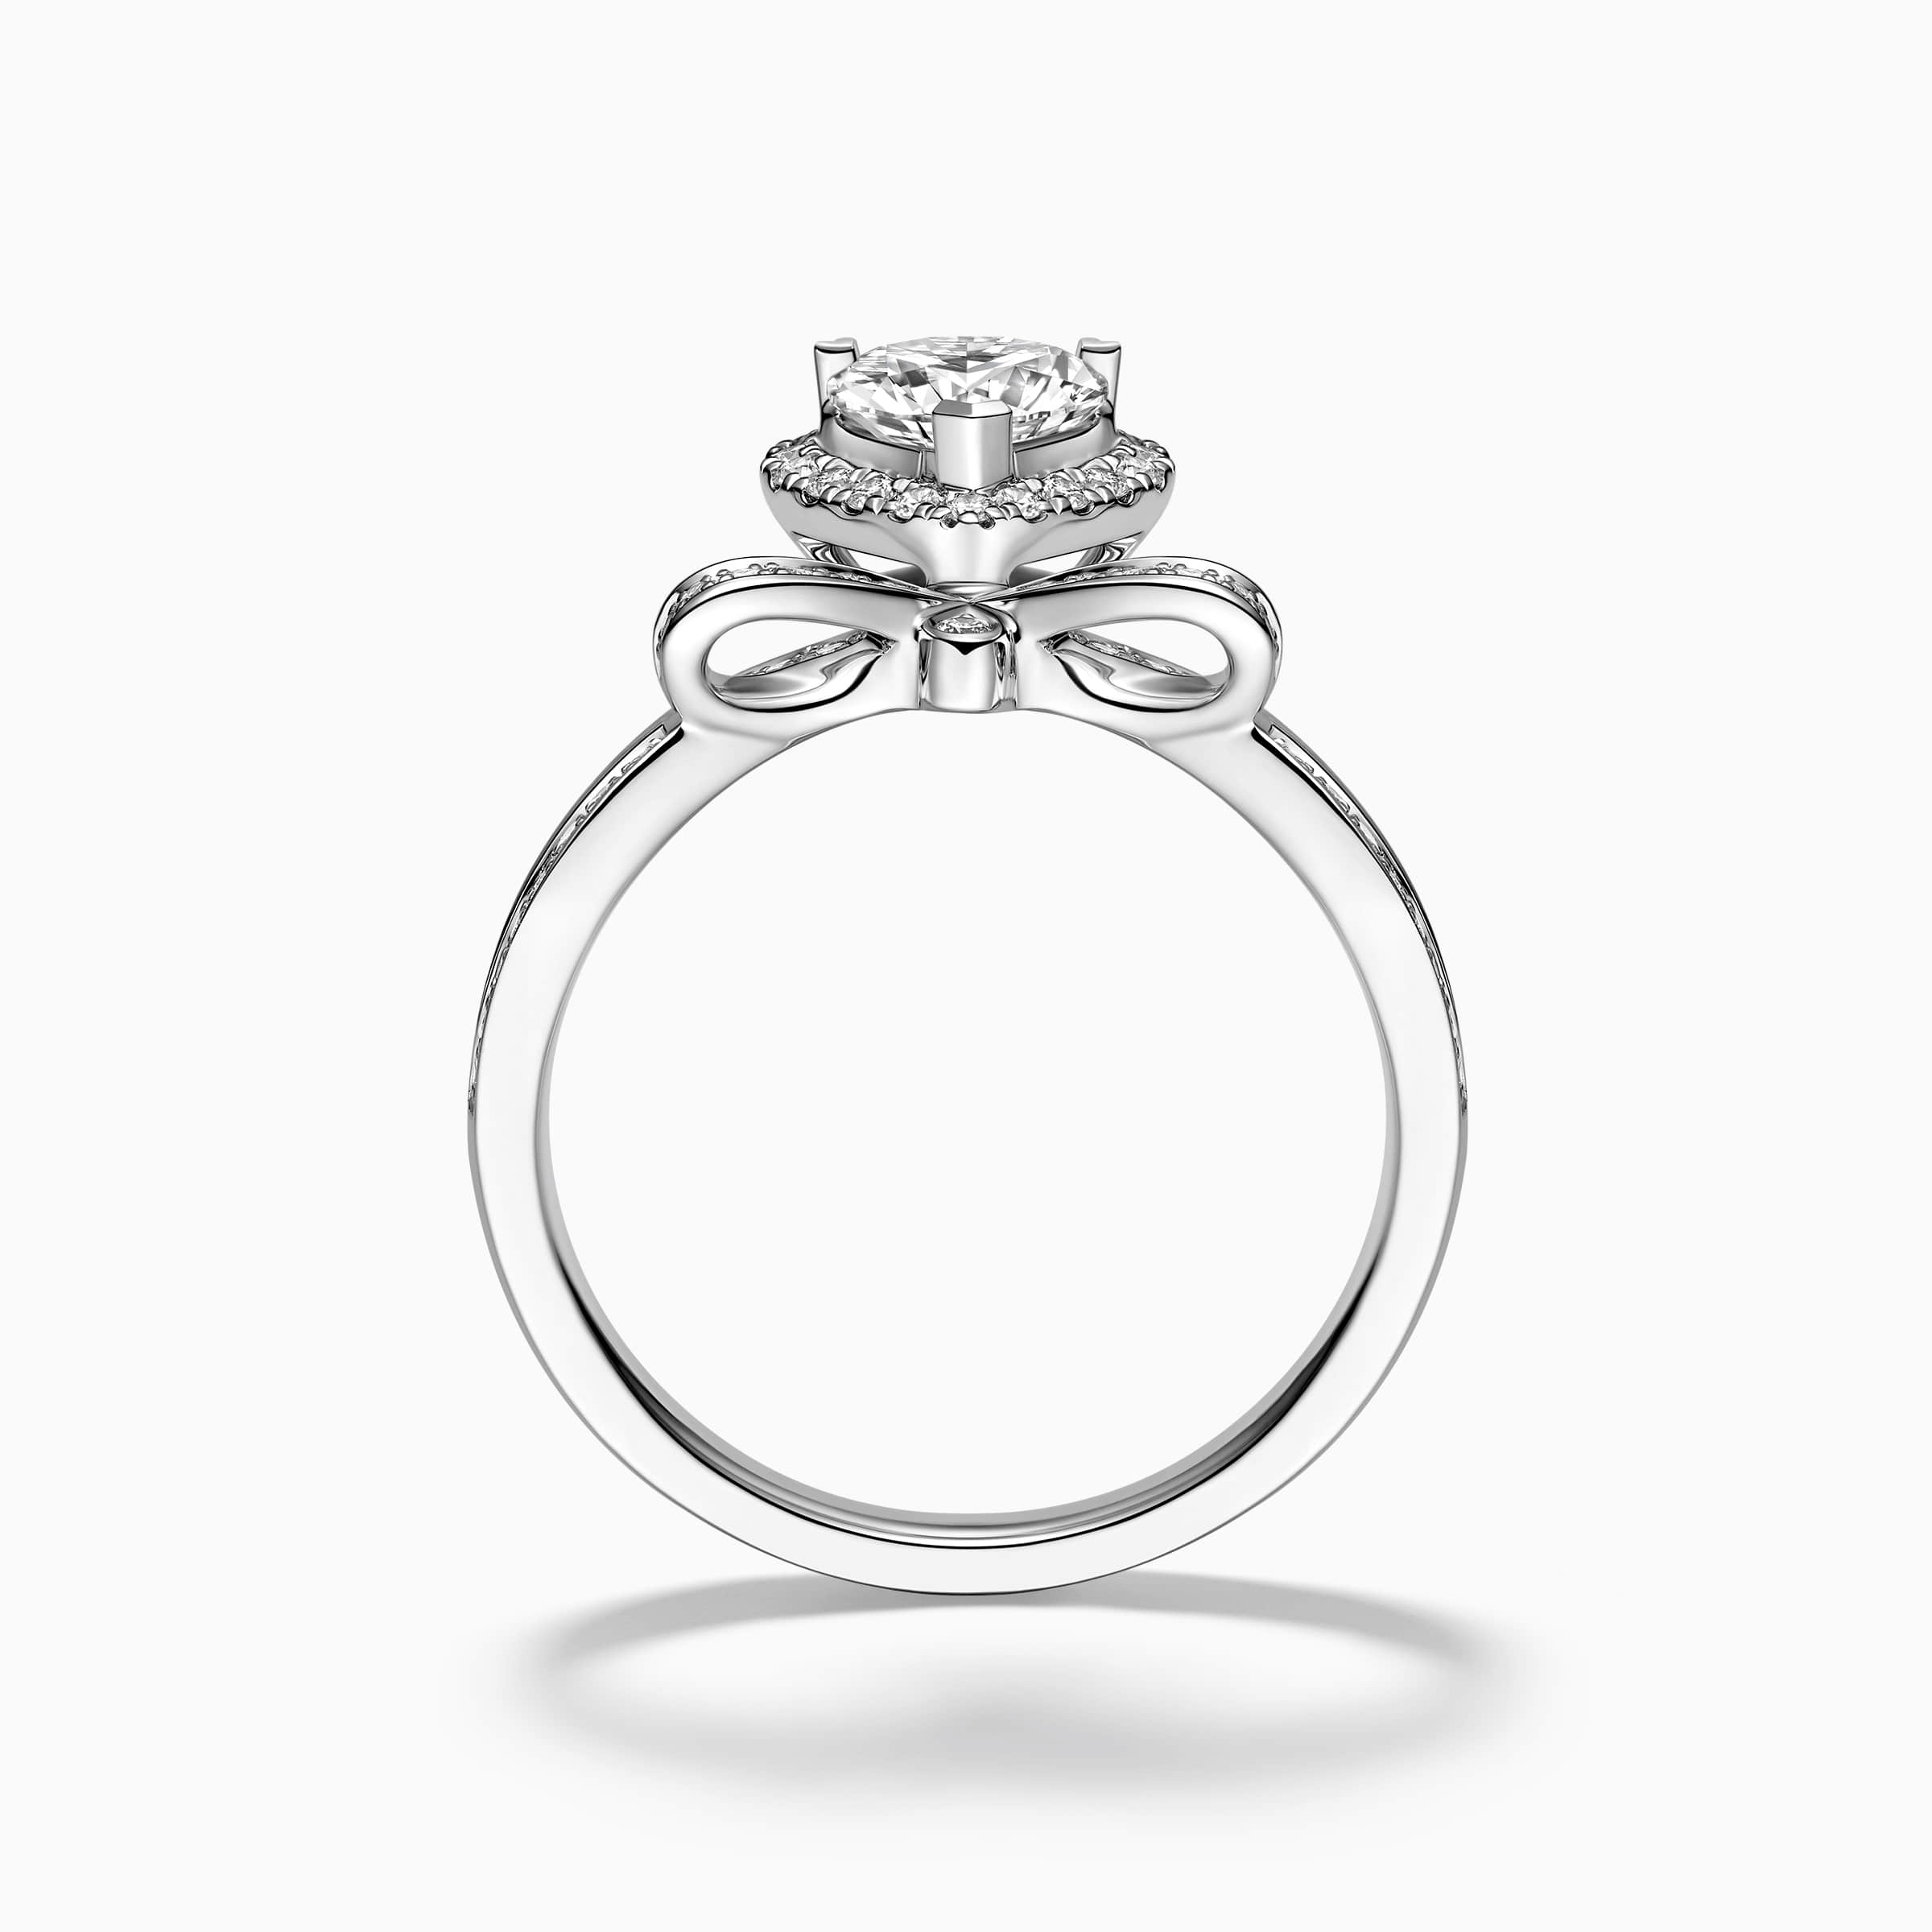 Darry Ring crown engagement ring side view